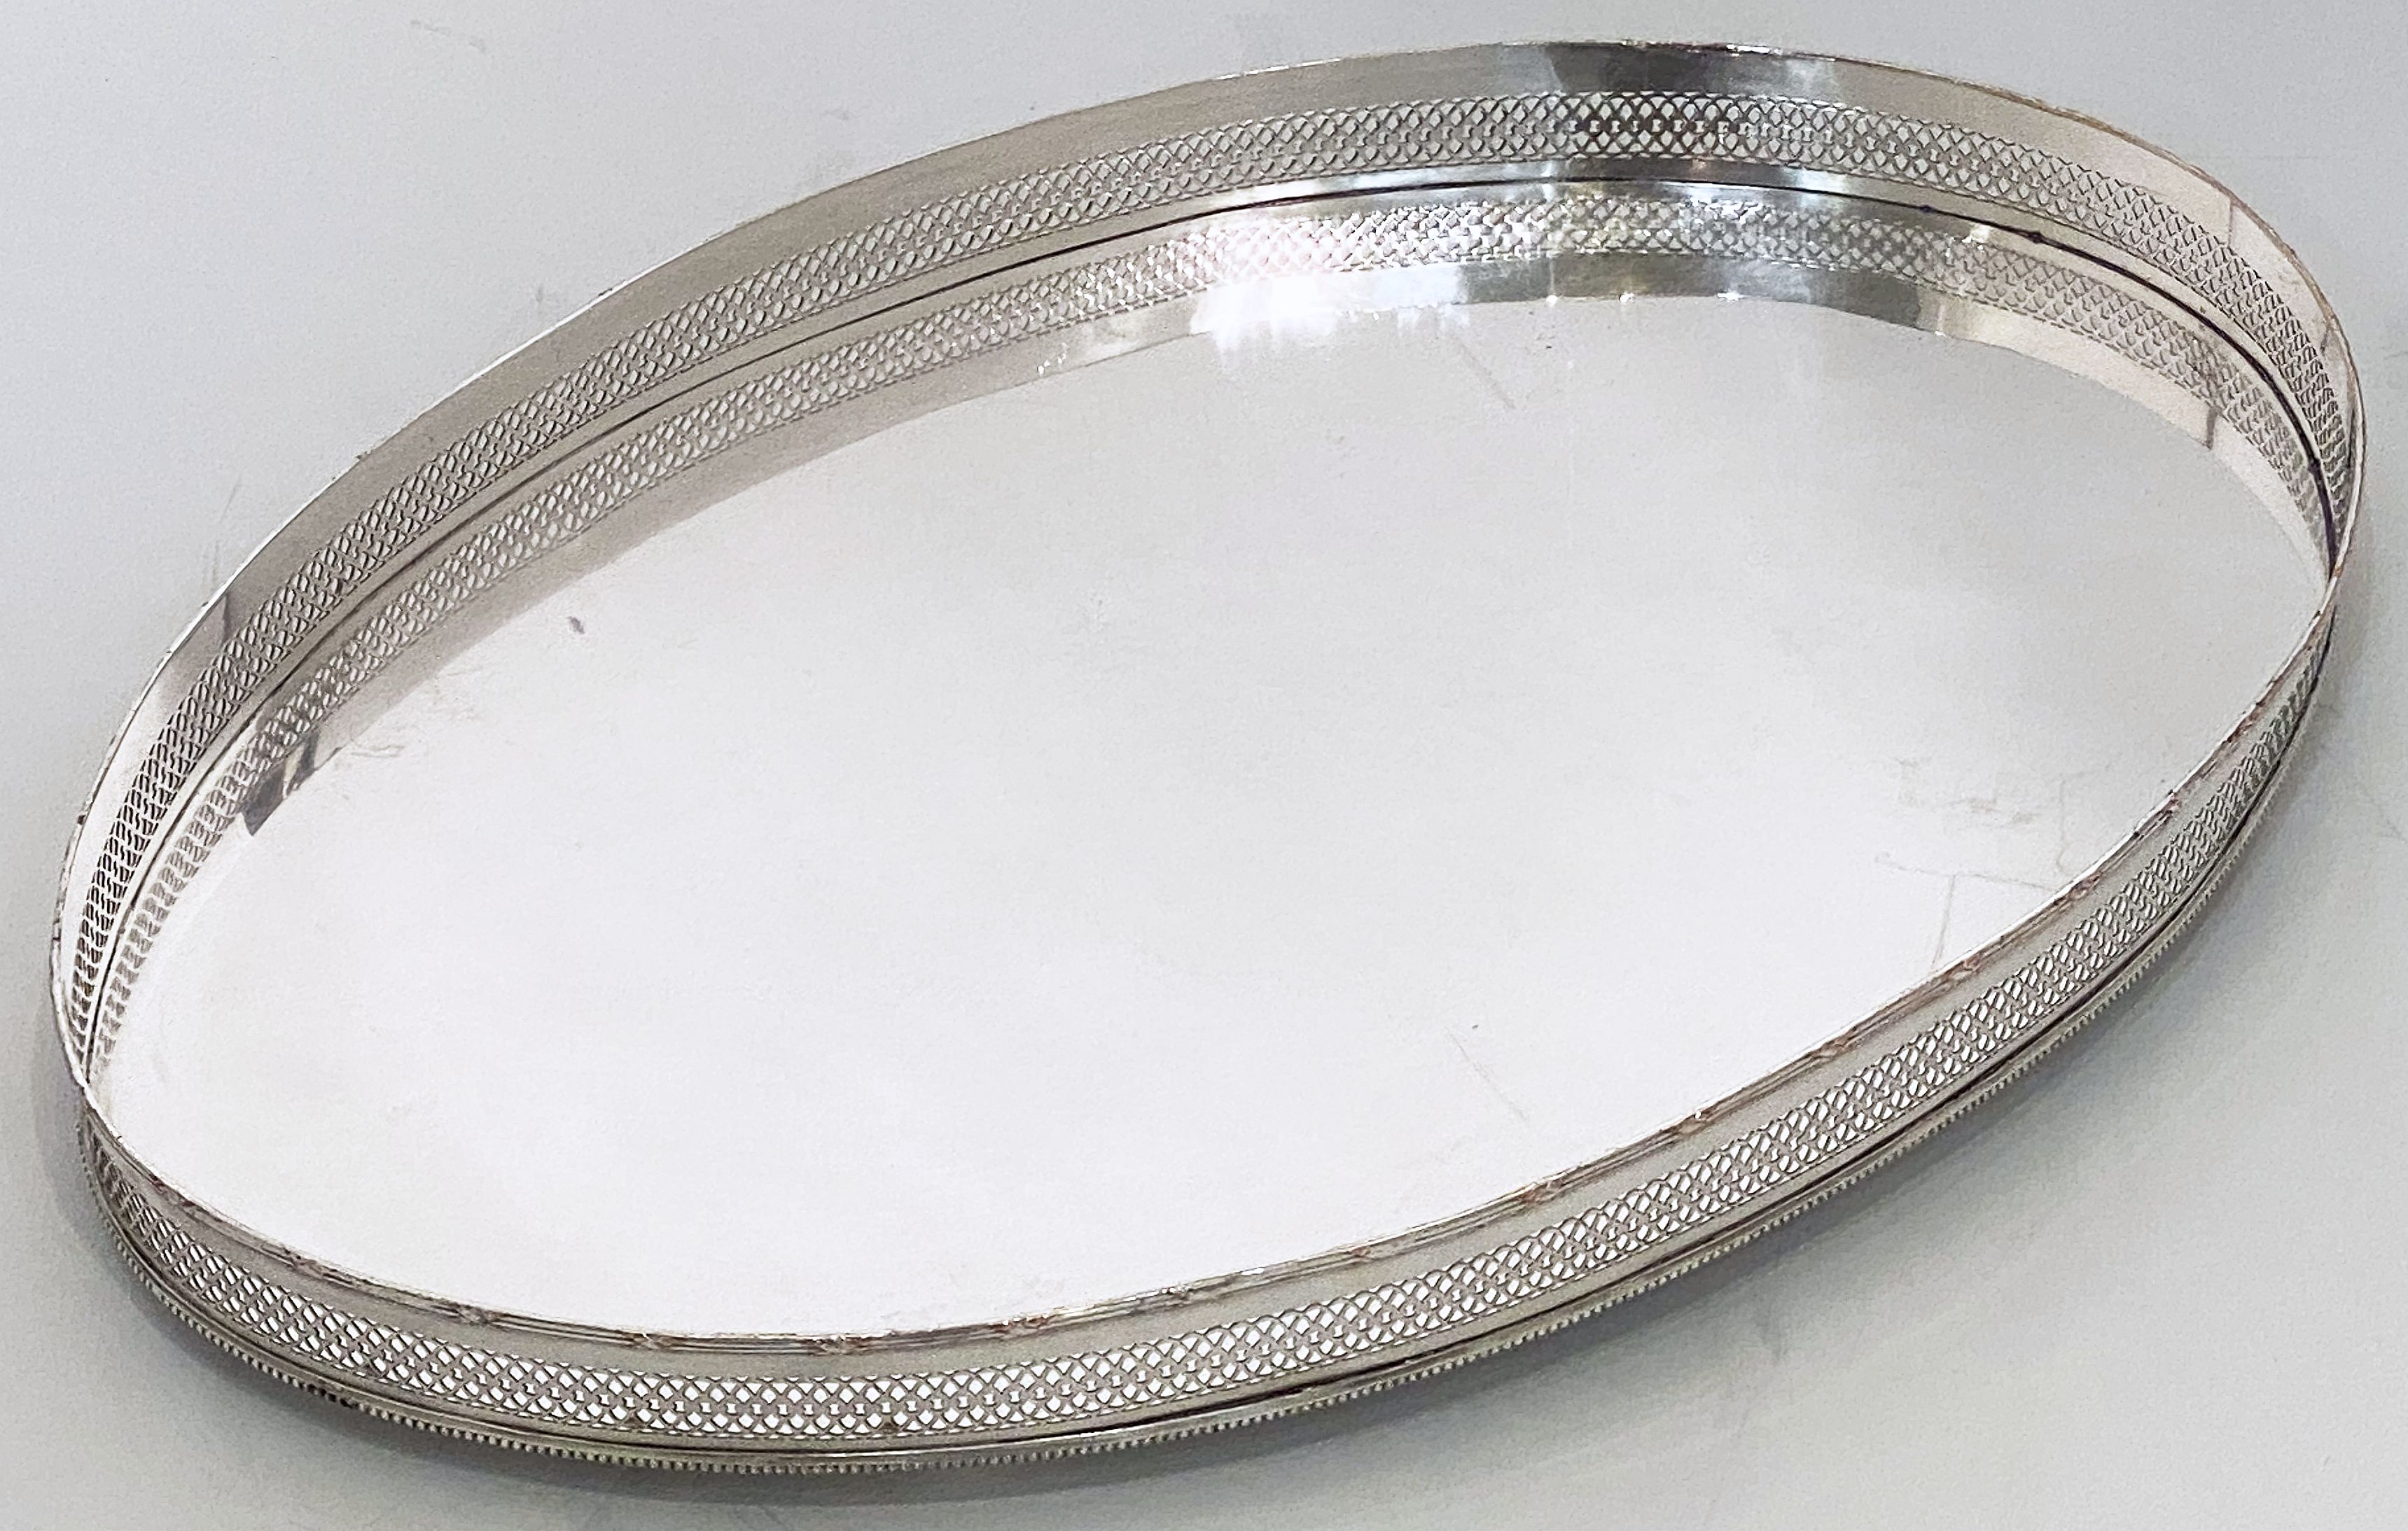 A handsome large English oval gallery serving or drinks tray (or platter) of fine Sheffield plate silver with pierced serpentine gallery around the circumference.

Dimensions: Gallery H 2 1/2 inches x W 24 inches x D 16 inches.